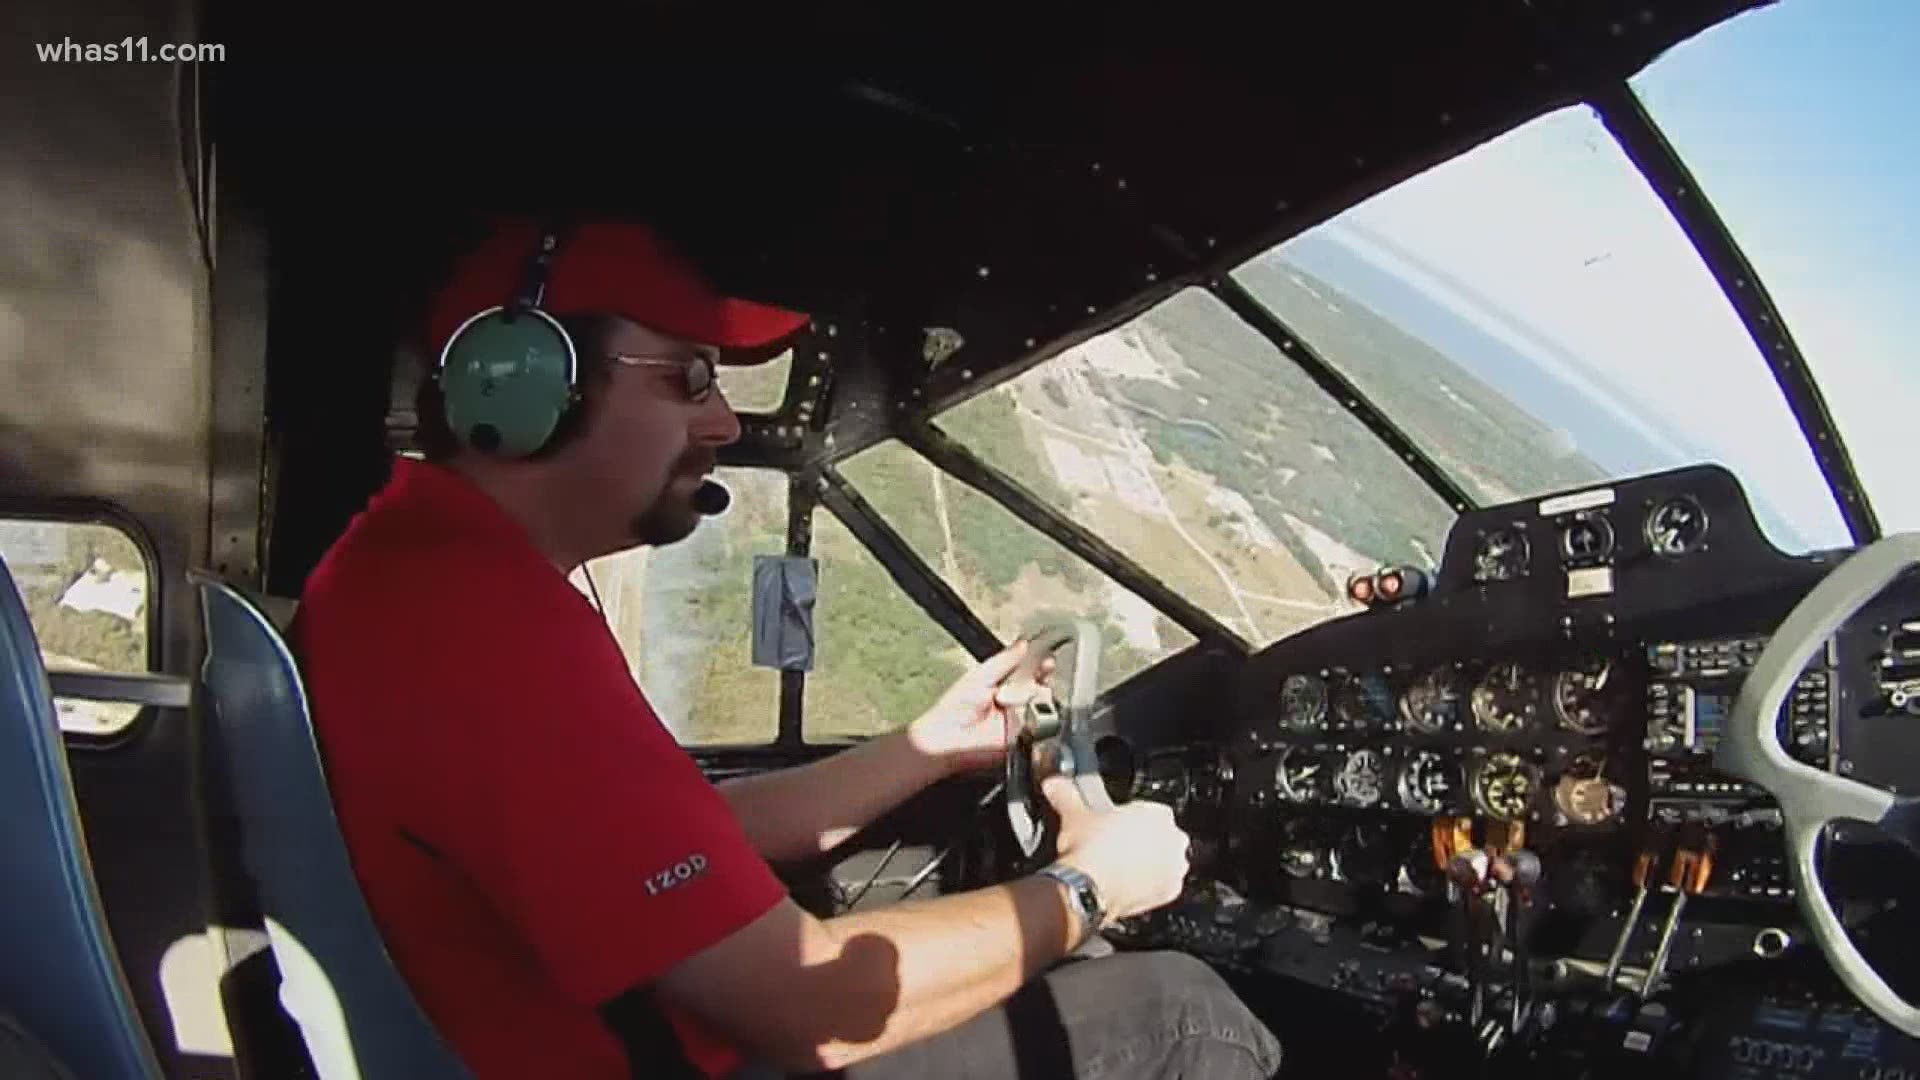 Matt Younkin is a third generation pilot and says his dedication to the skies and performing is something he grapples with after losing family members.